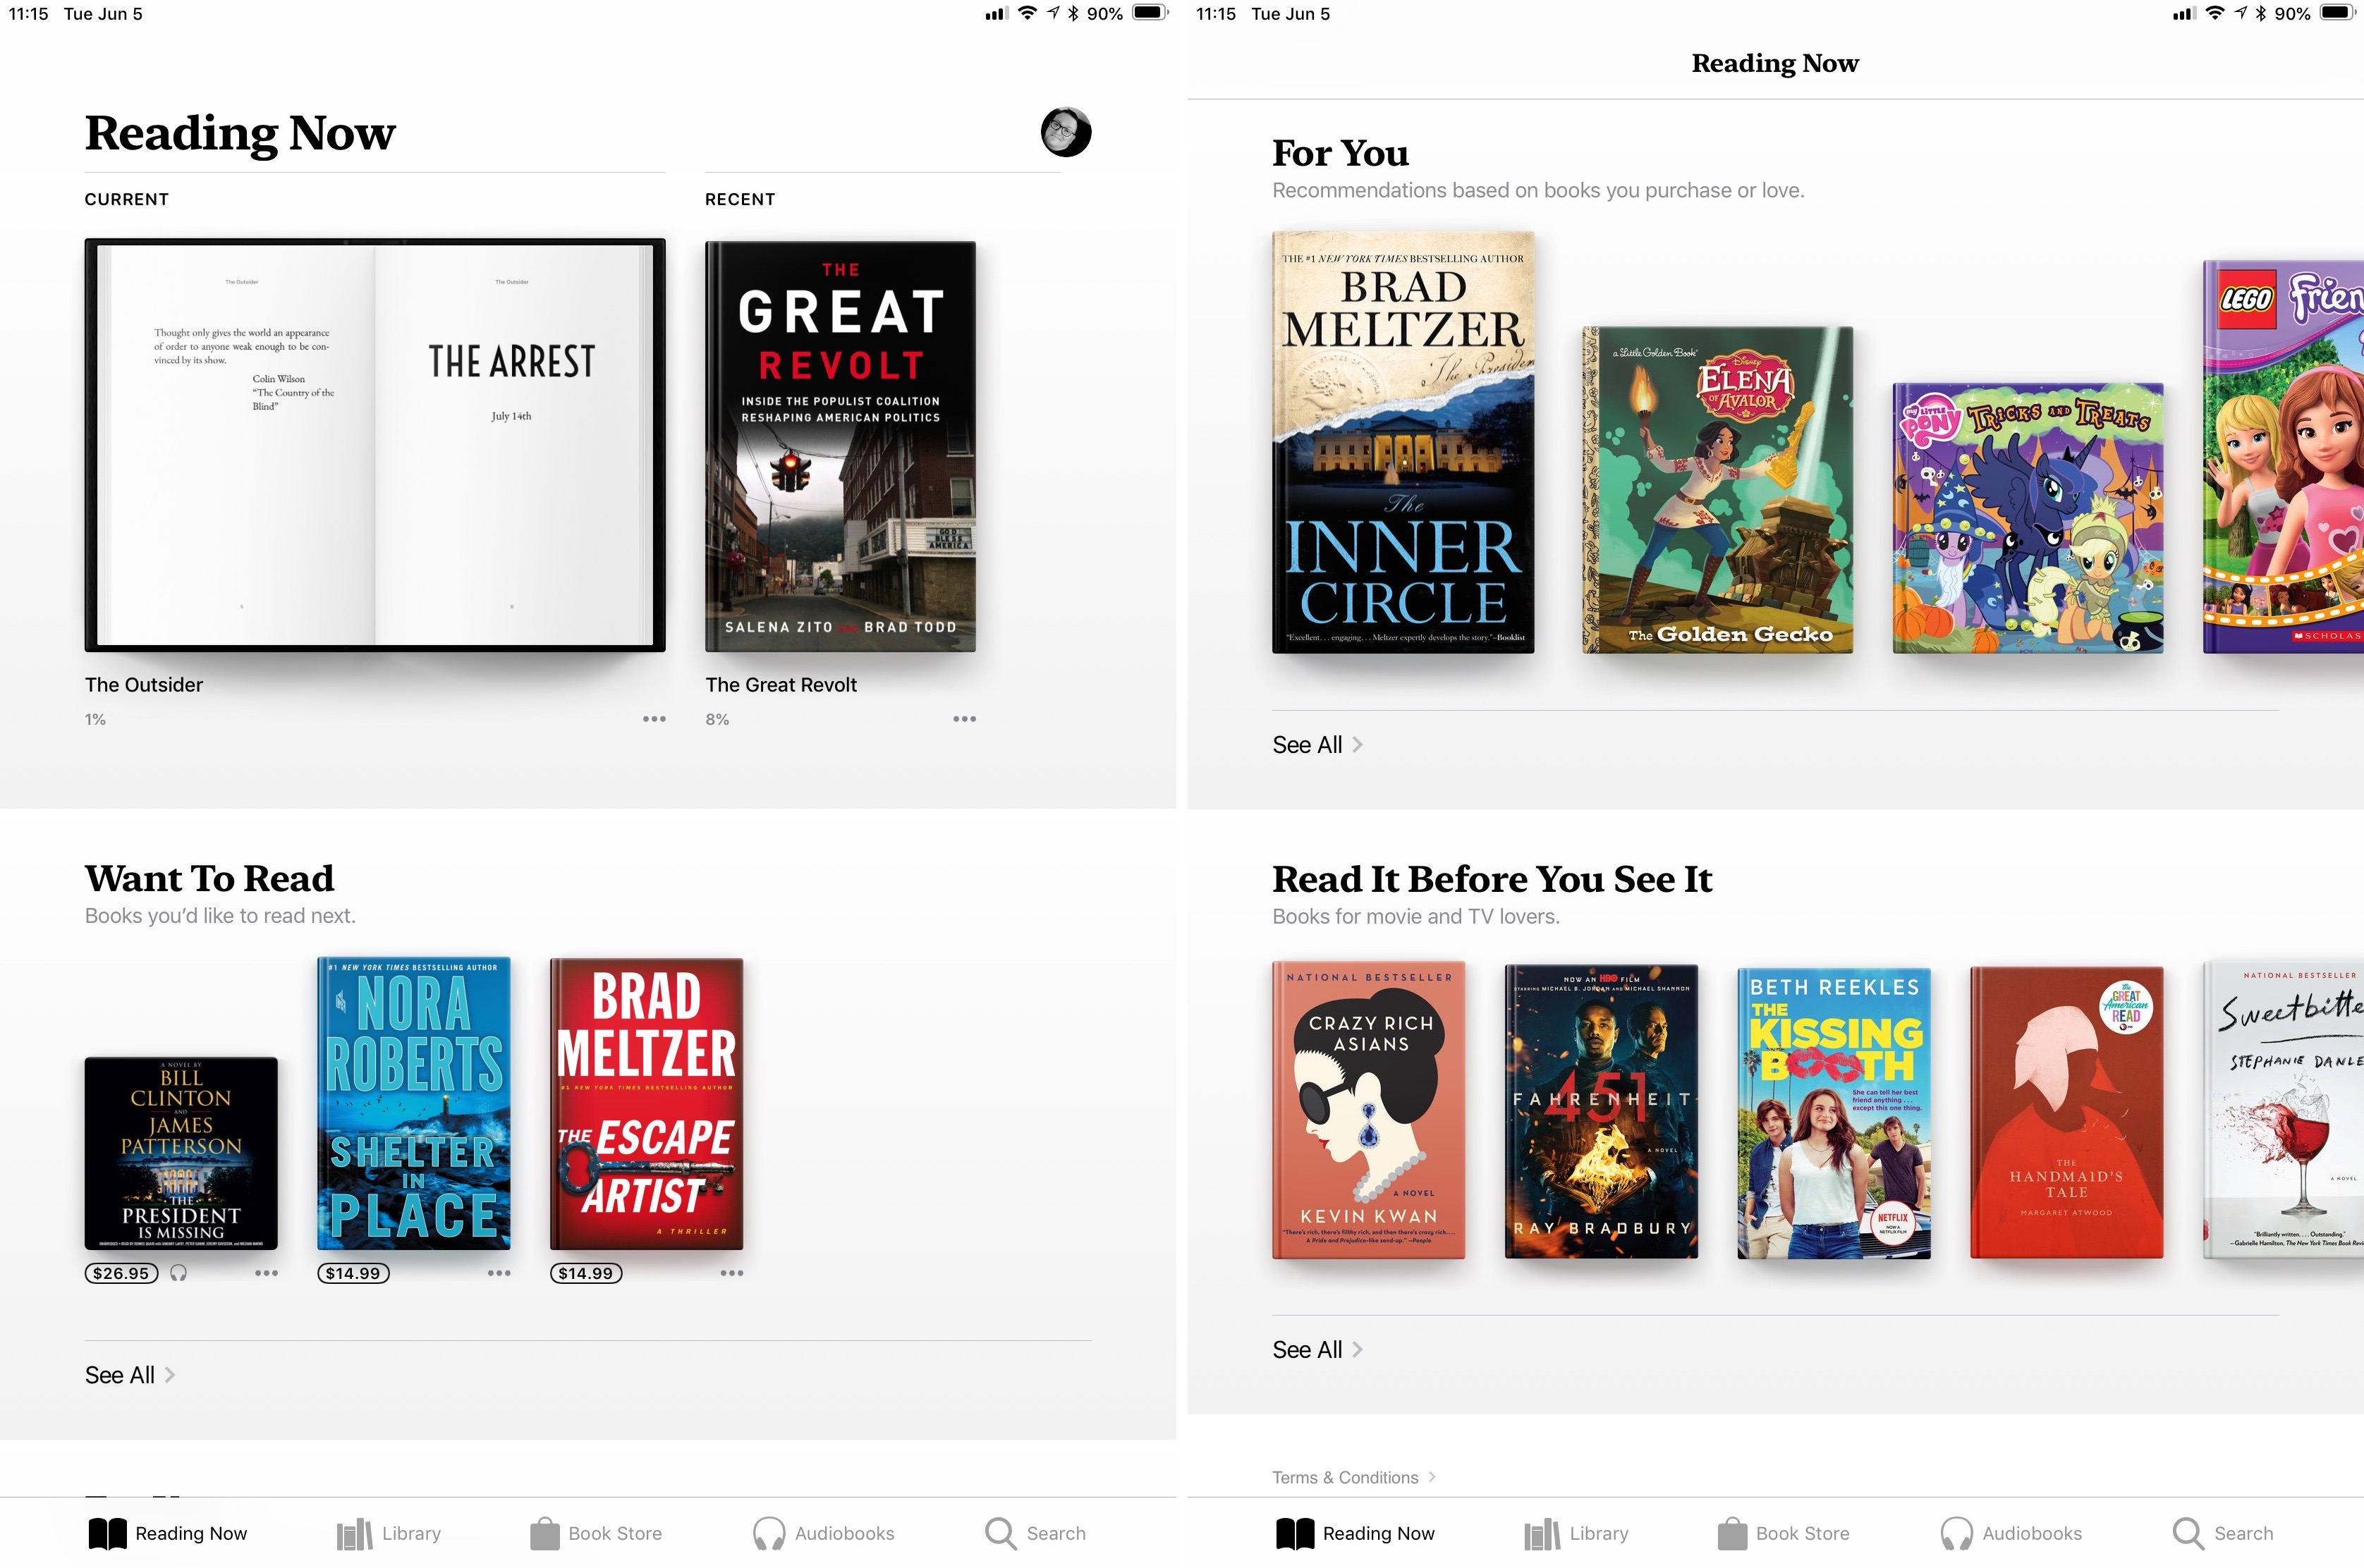 apps read books for you